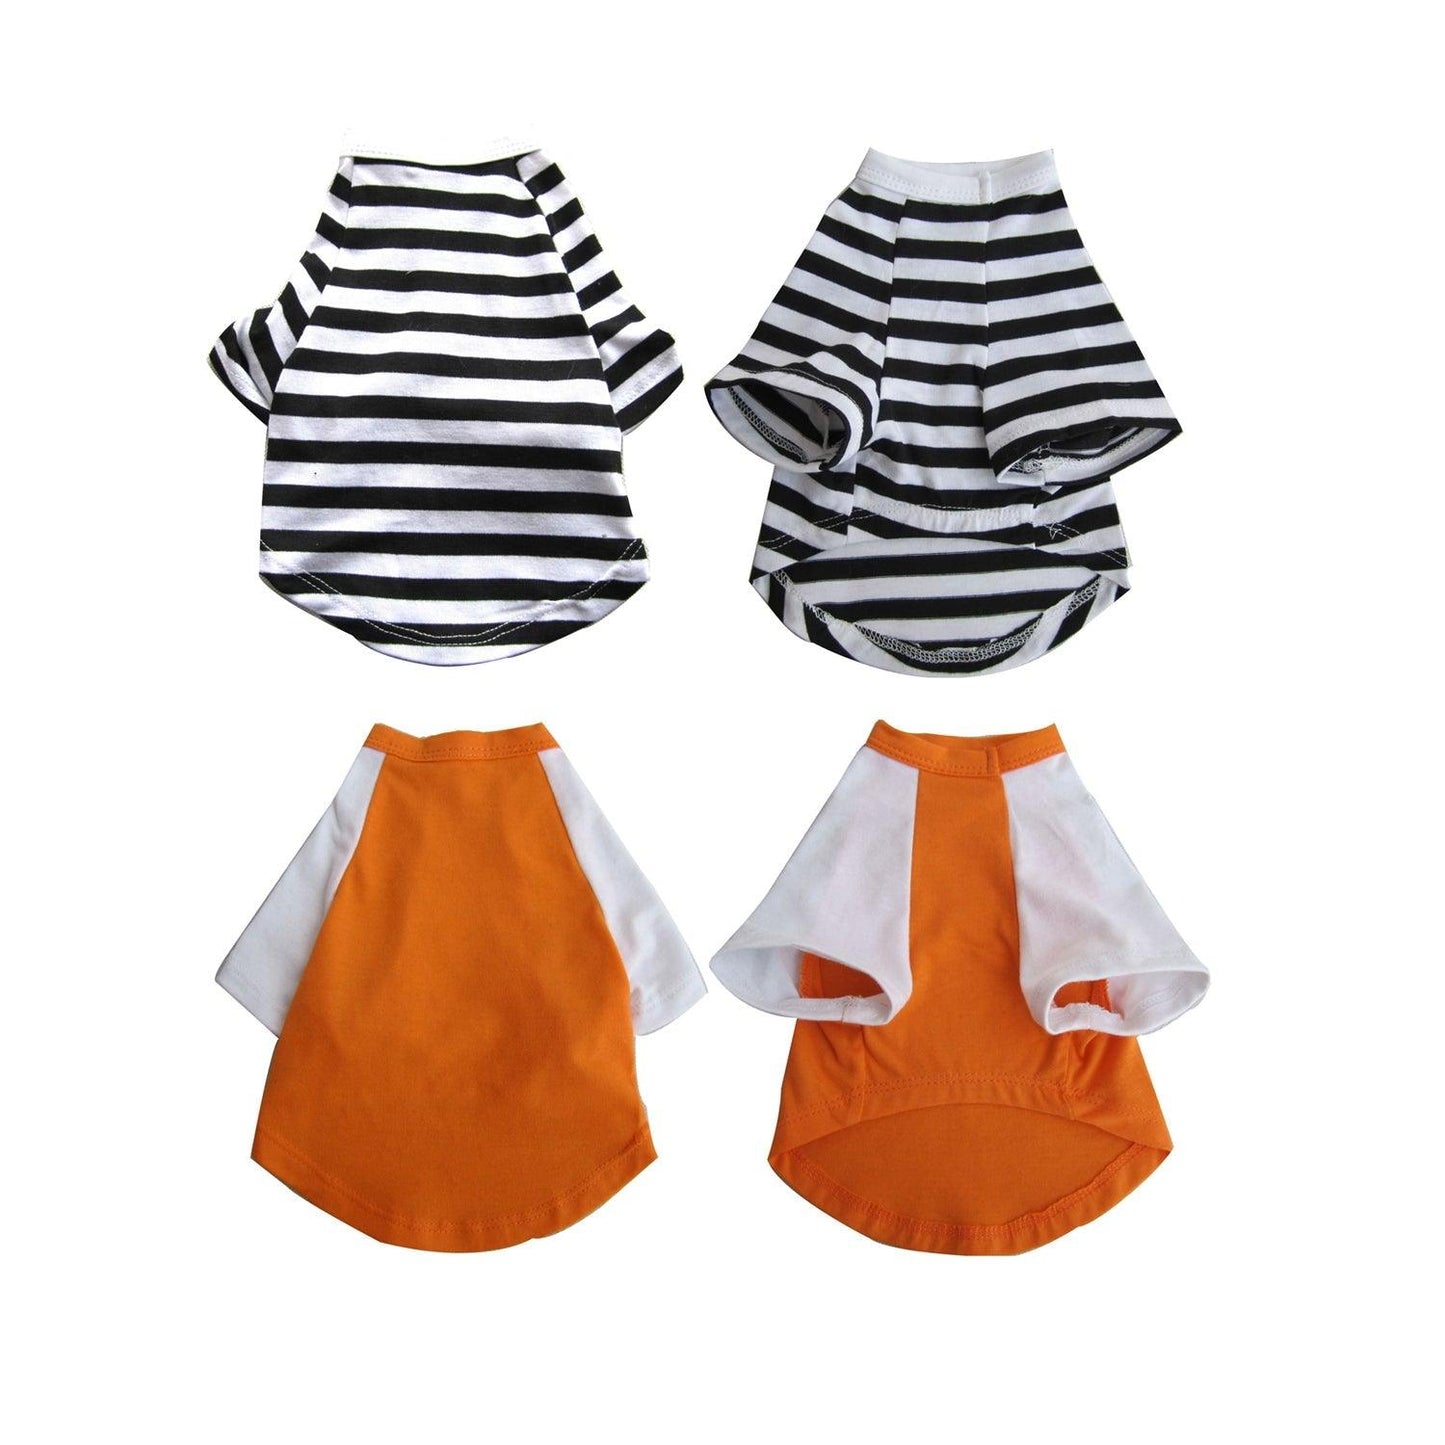 2 Pack Pretty Pet Apparel with Sleeves - XX-Small